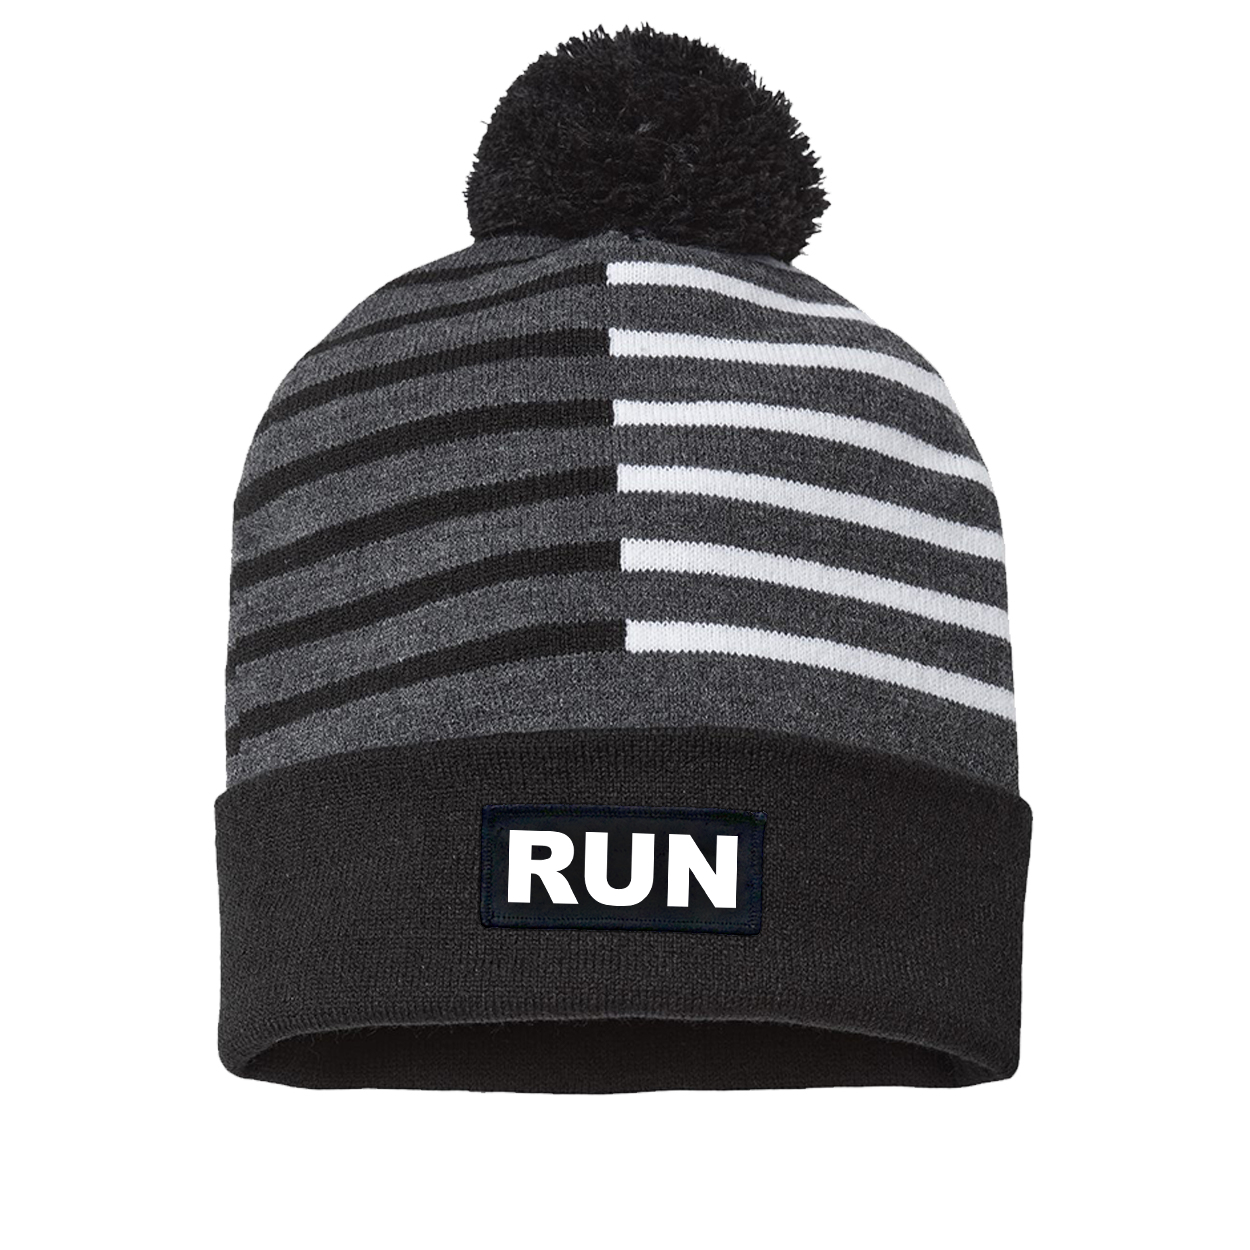 Run Brand Logo Night Out Woven Patch Roll Up Pom Knit Beanie Half Color Black/White (White Logo)